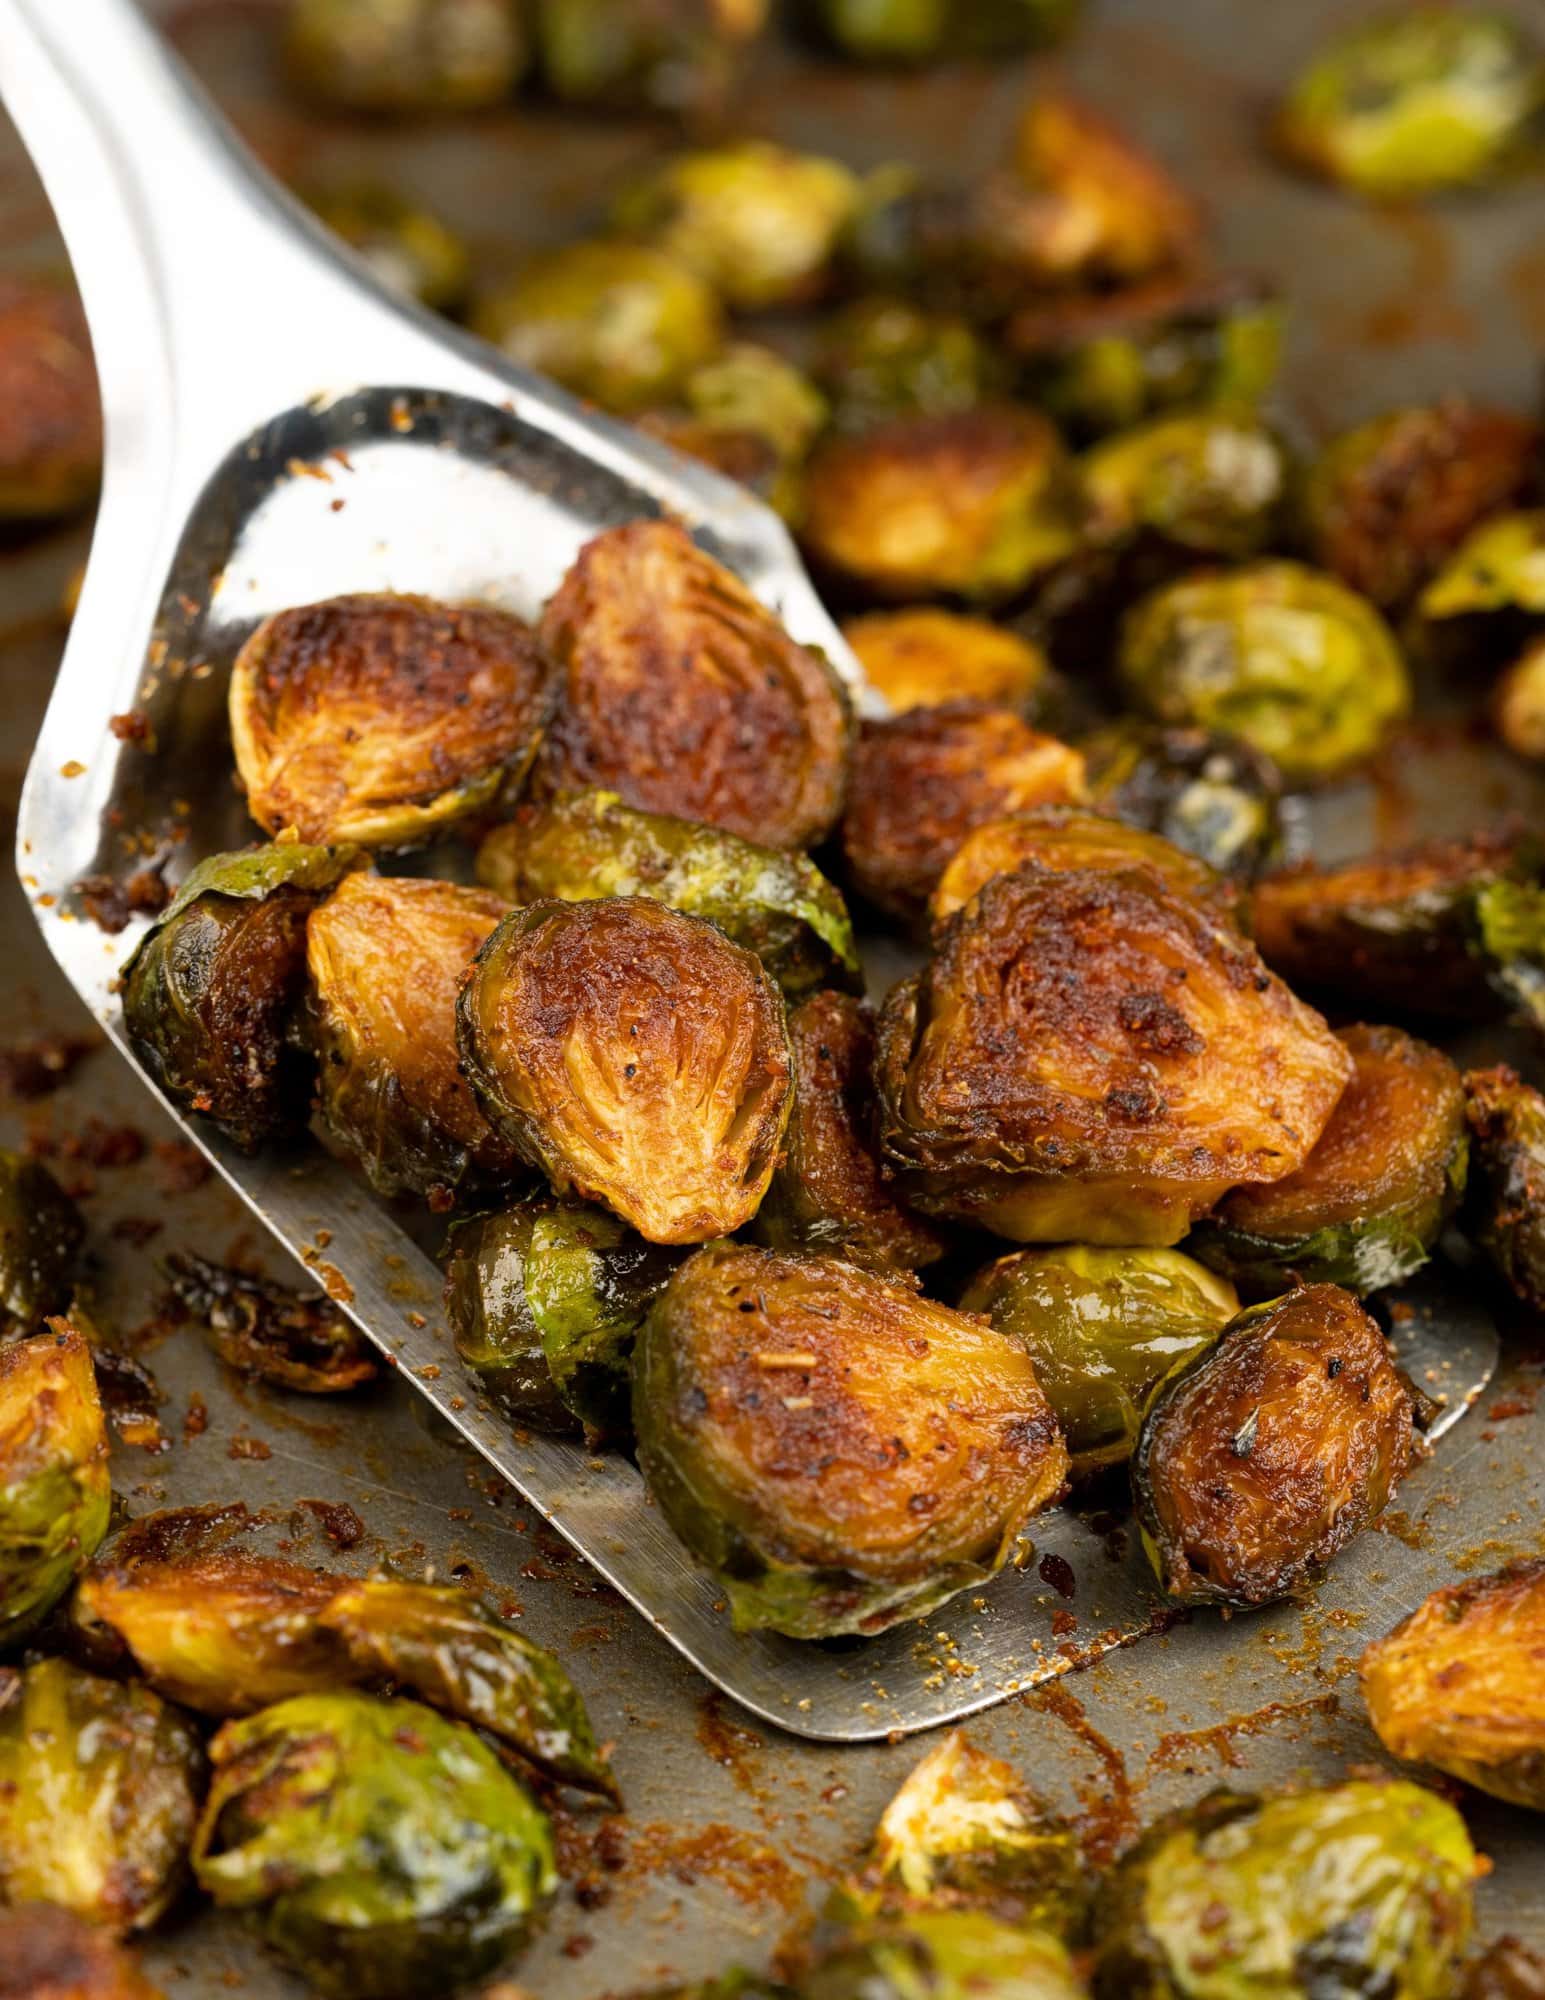 Oven roasted brussels sprouts appear caramelized with a golden crust and picked with a spatula.